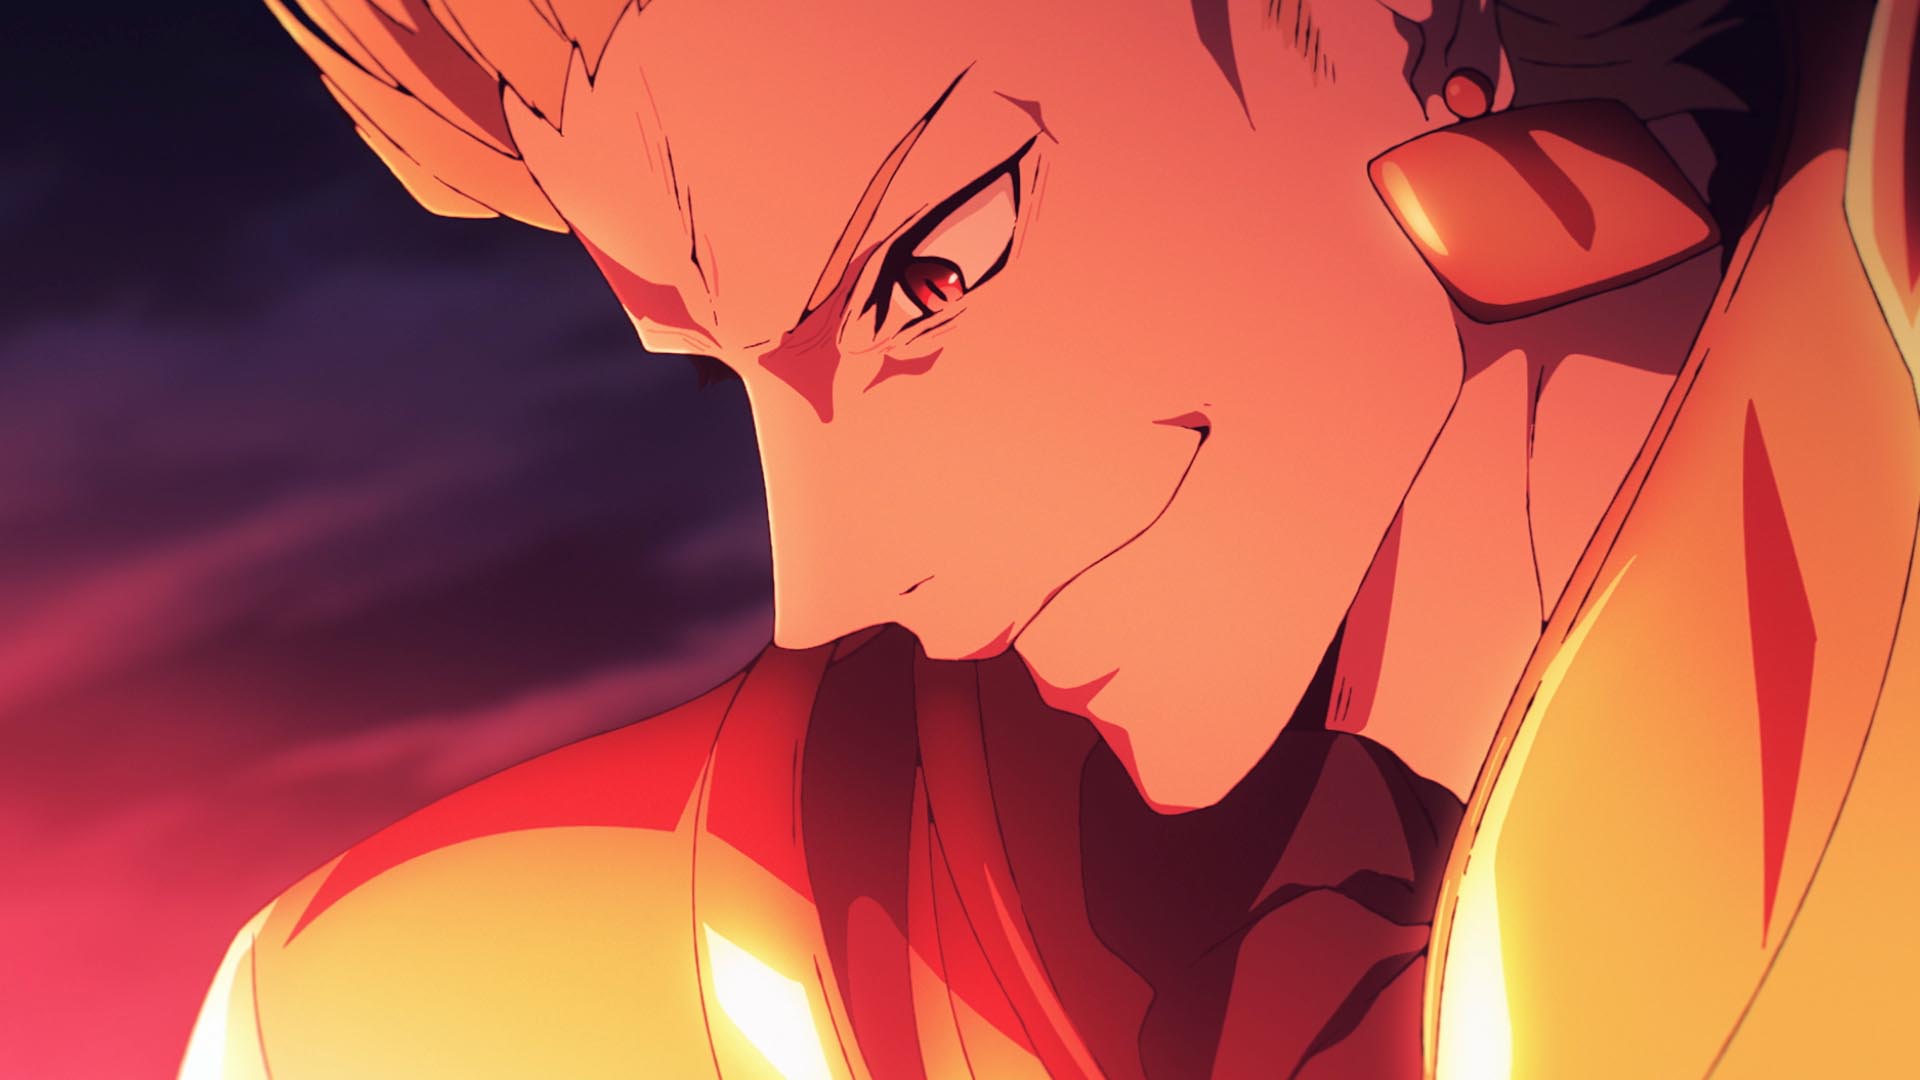 HD wallpaper of Fate/strange fake character with a sly smirk against a fiery backdrop suitable for desktop background.